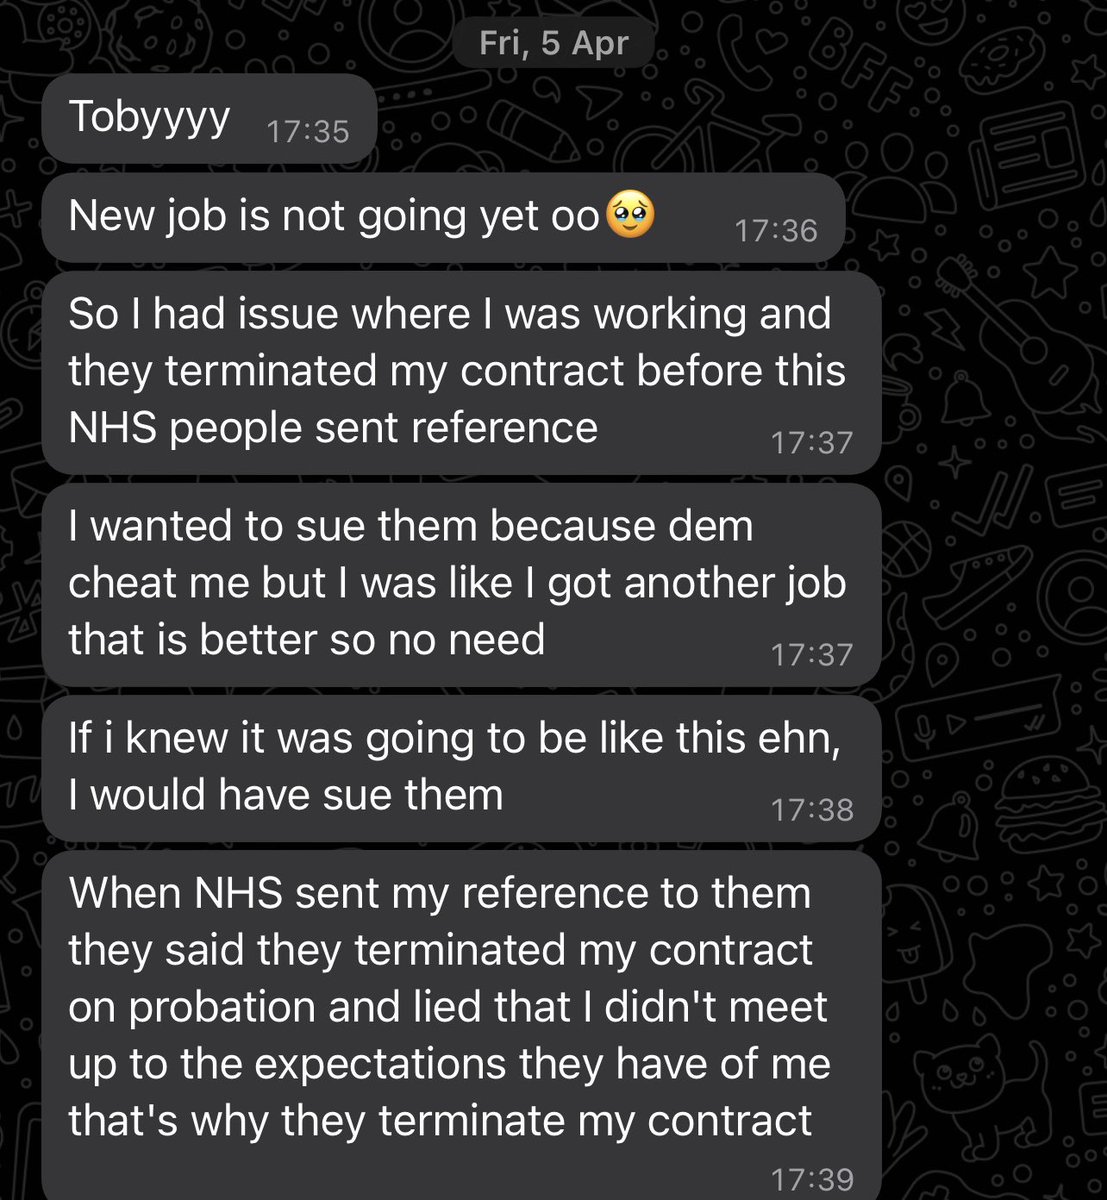 Over a month ago, I had a client who got an offer in the NHS. They were done with everything, just one last check with recent employer for reference. They didn’t end well, in fact, she & her manager fell off because they even hoarded her wages. Naso these people write plenty